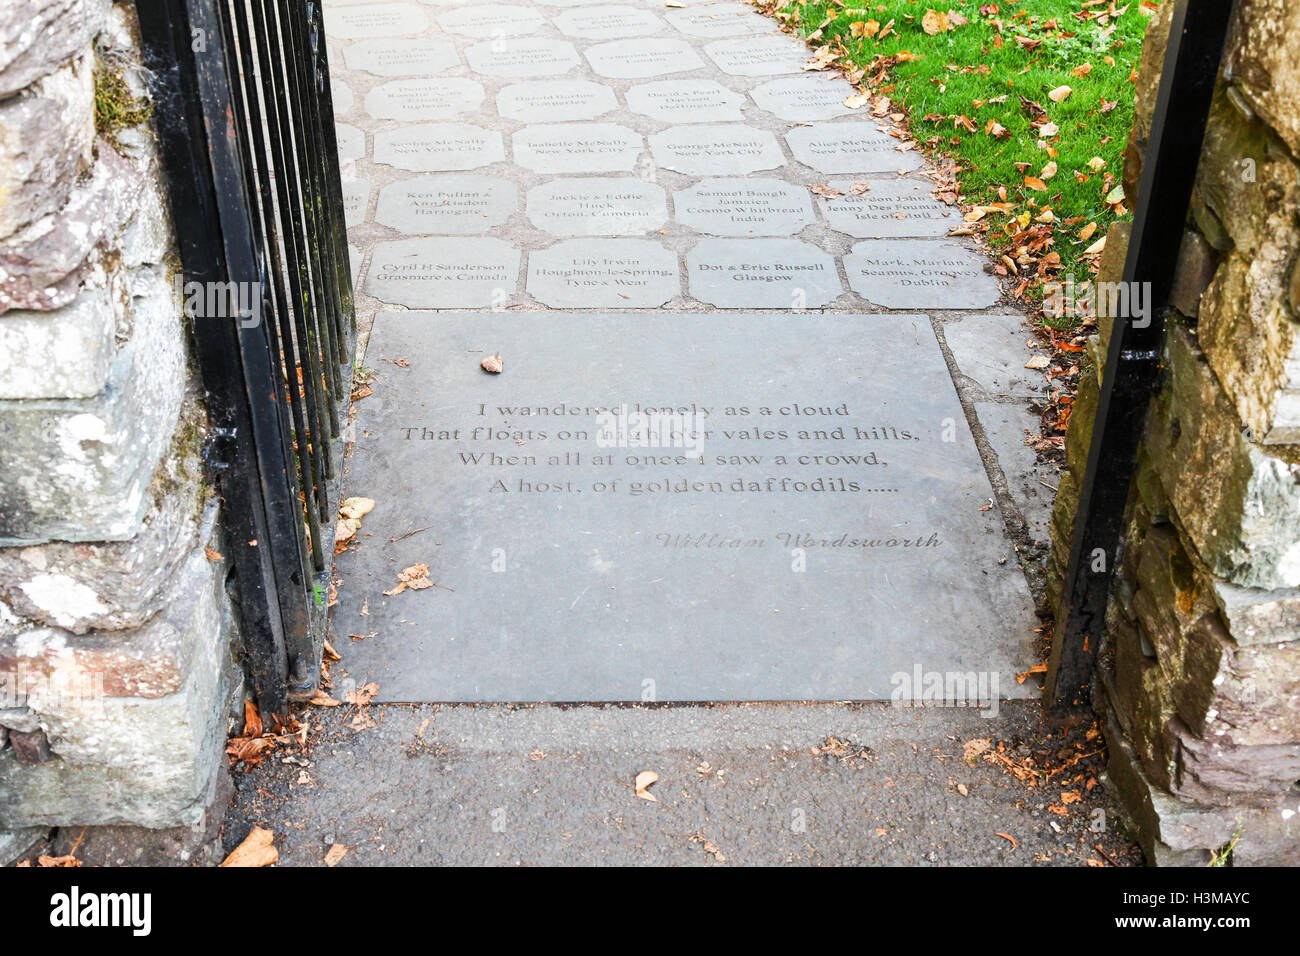 Inscription on paving, entrance to graveyard where poet William Wordsworth is buried, St Oswald's Church Grasmere Lake District Stock Photo